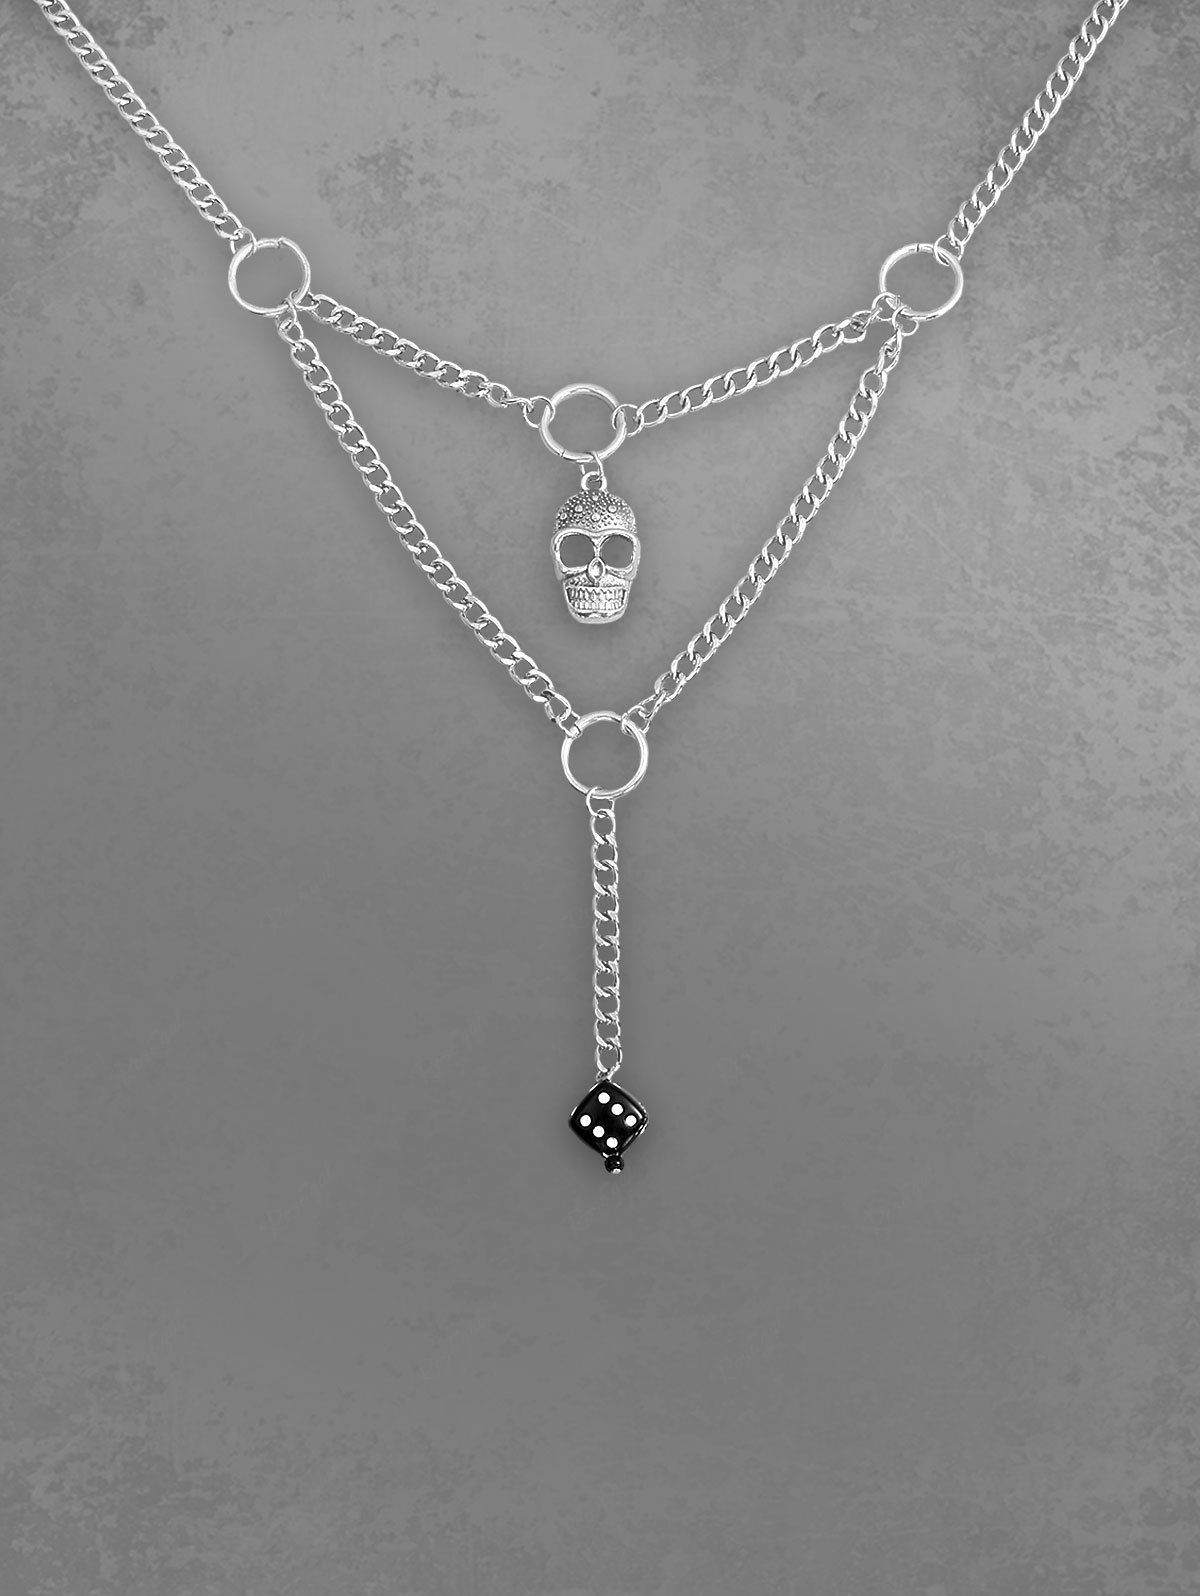 O-Ring Skull Dice Shaped Pendant Necklace